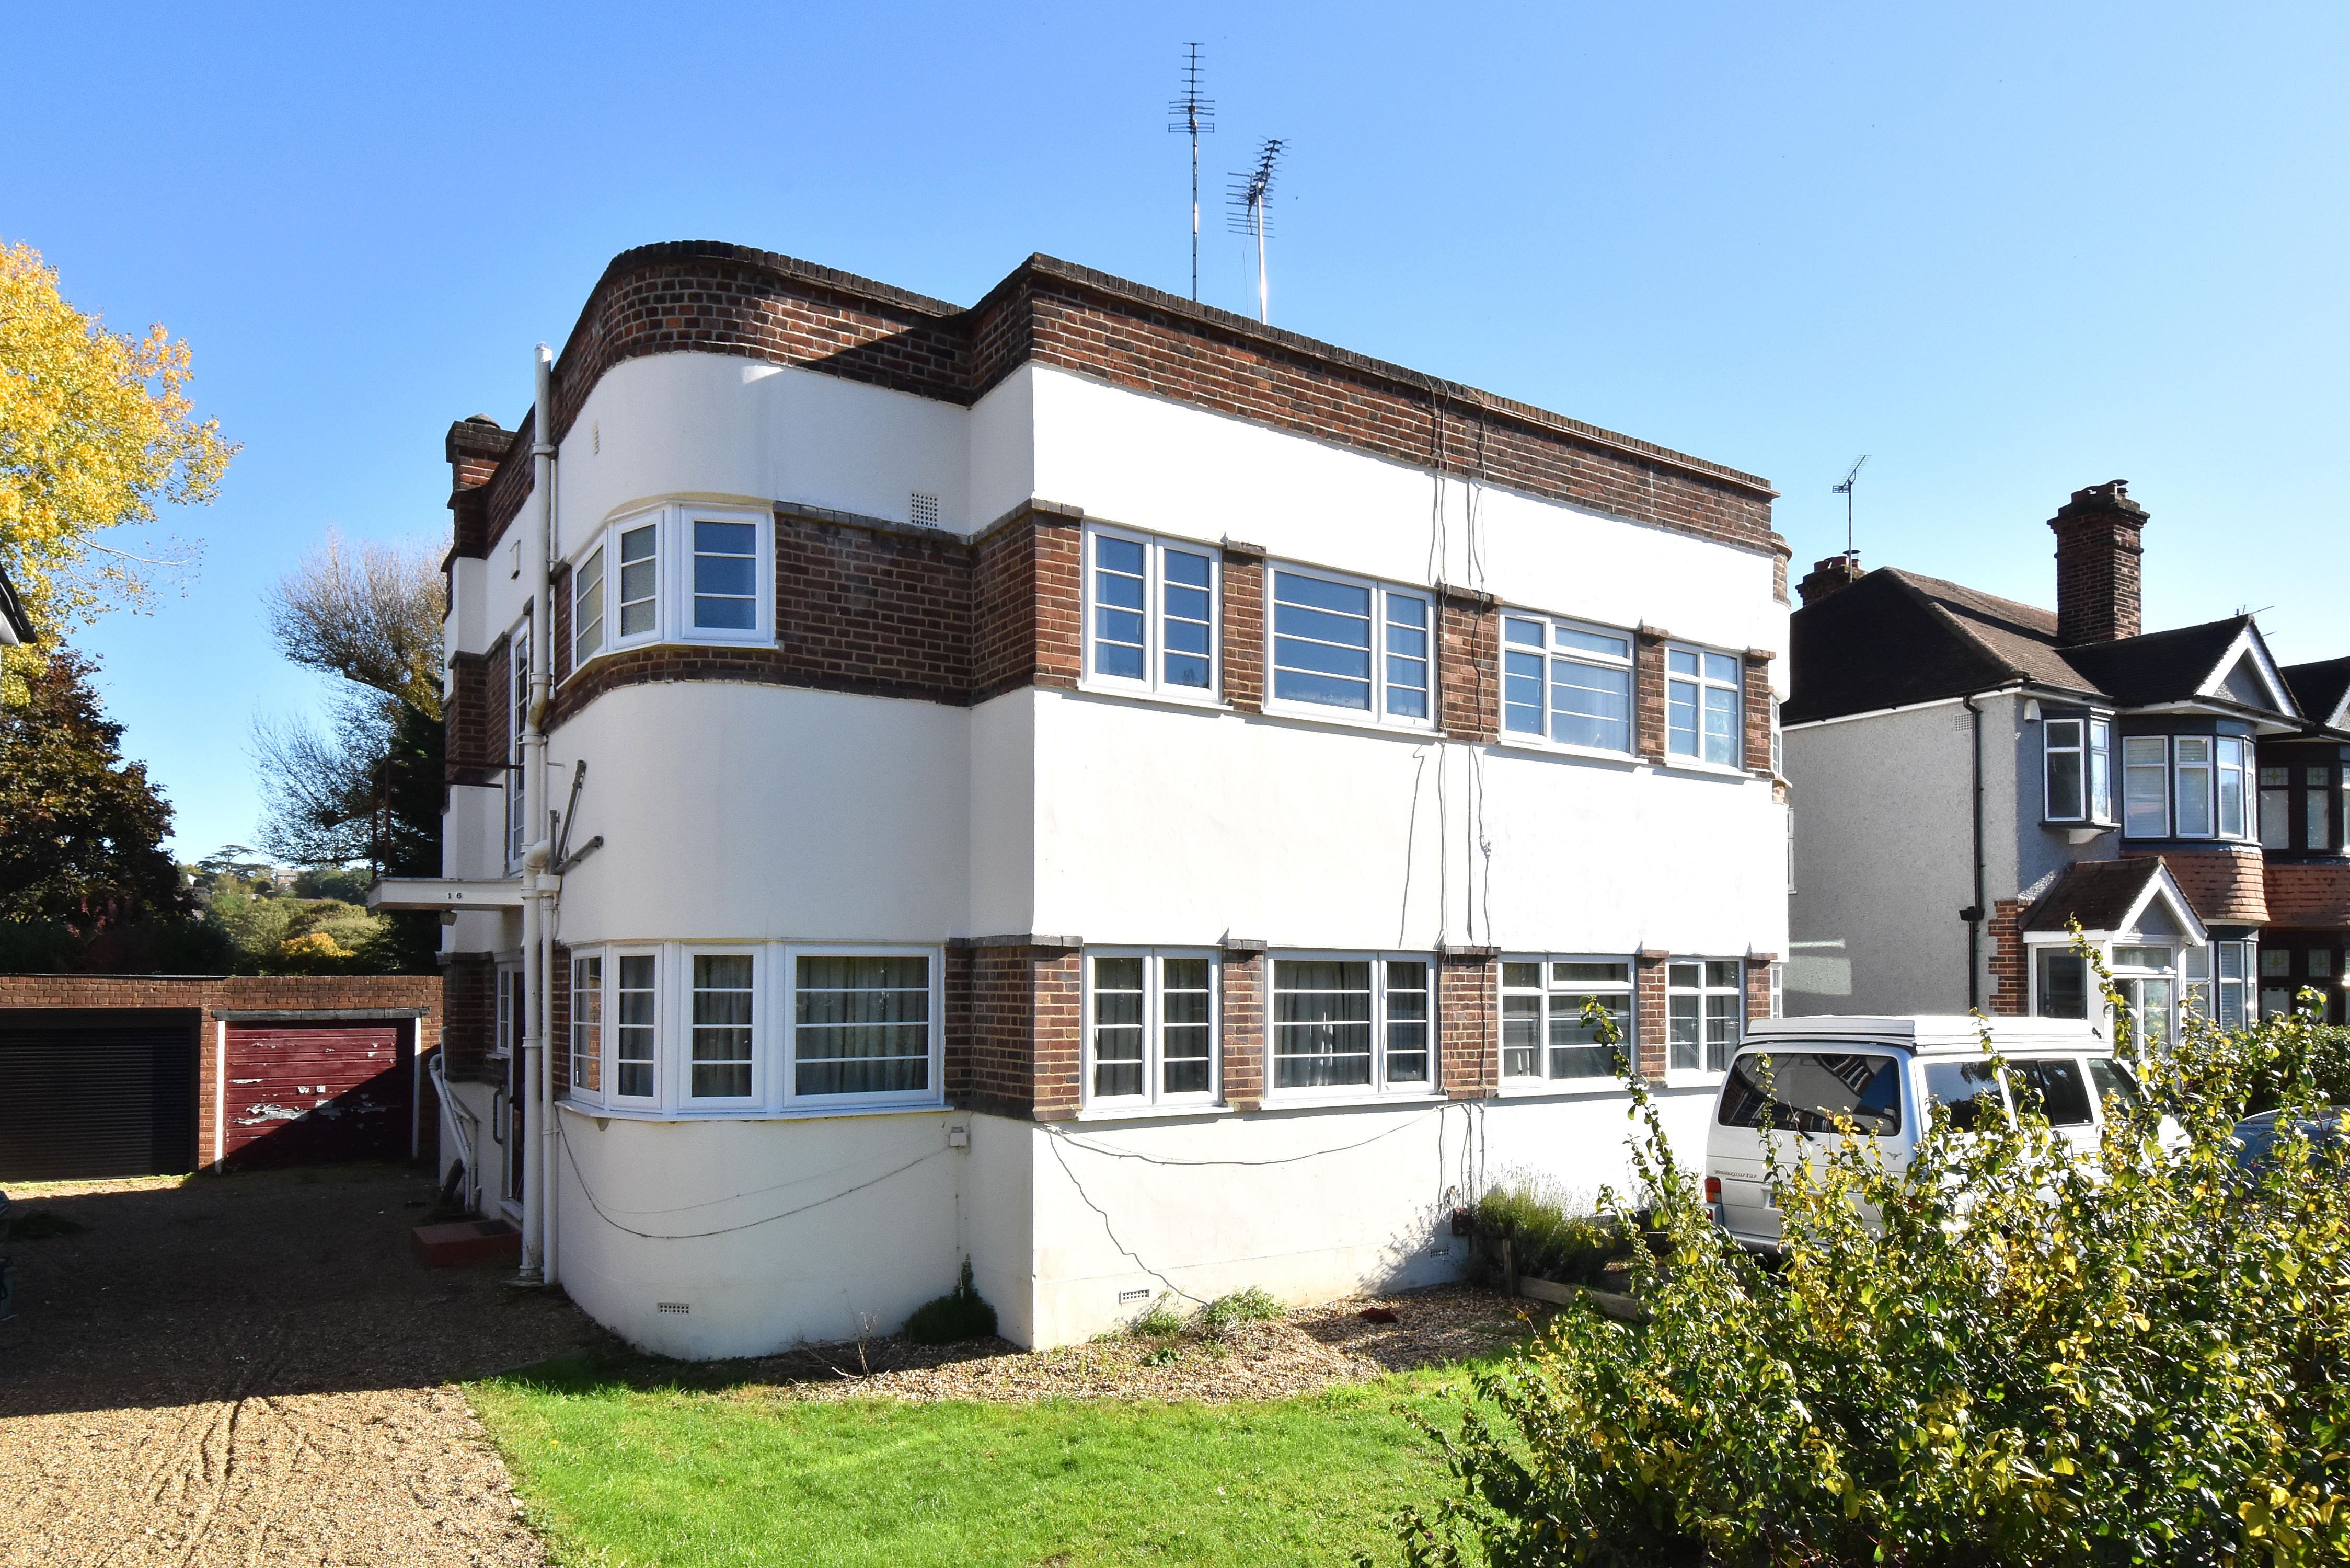 3 bed semi-detached house for sale in Ravensmead Road, Bromley, BR2 